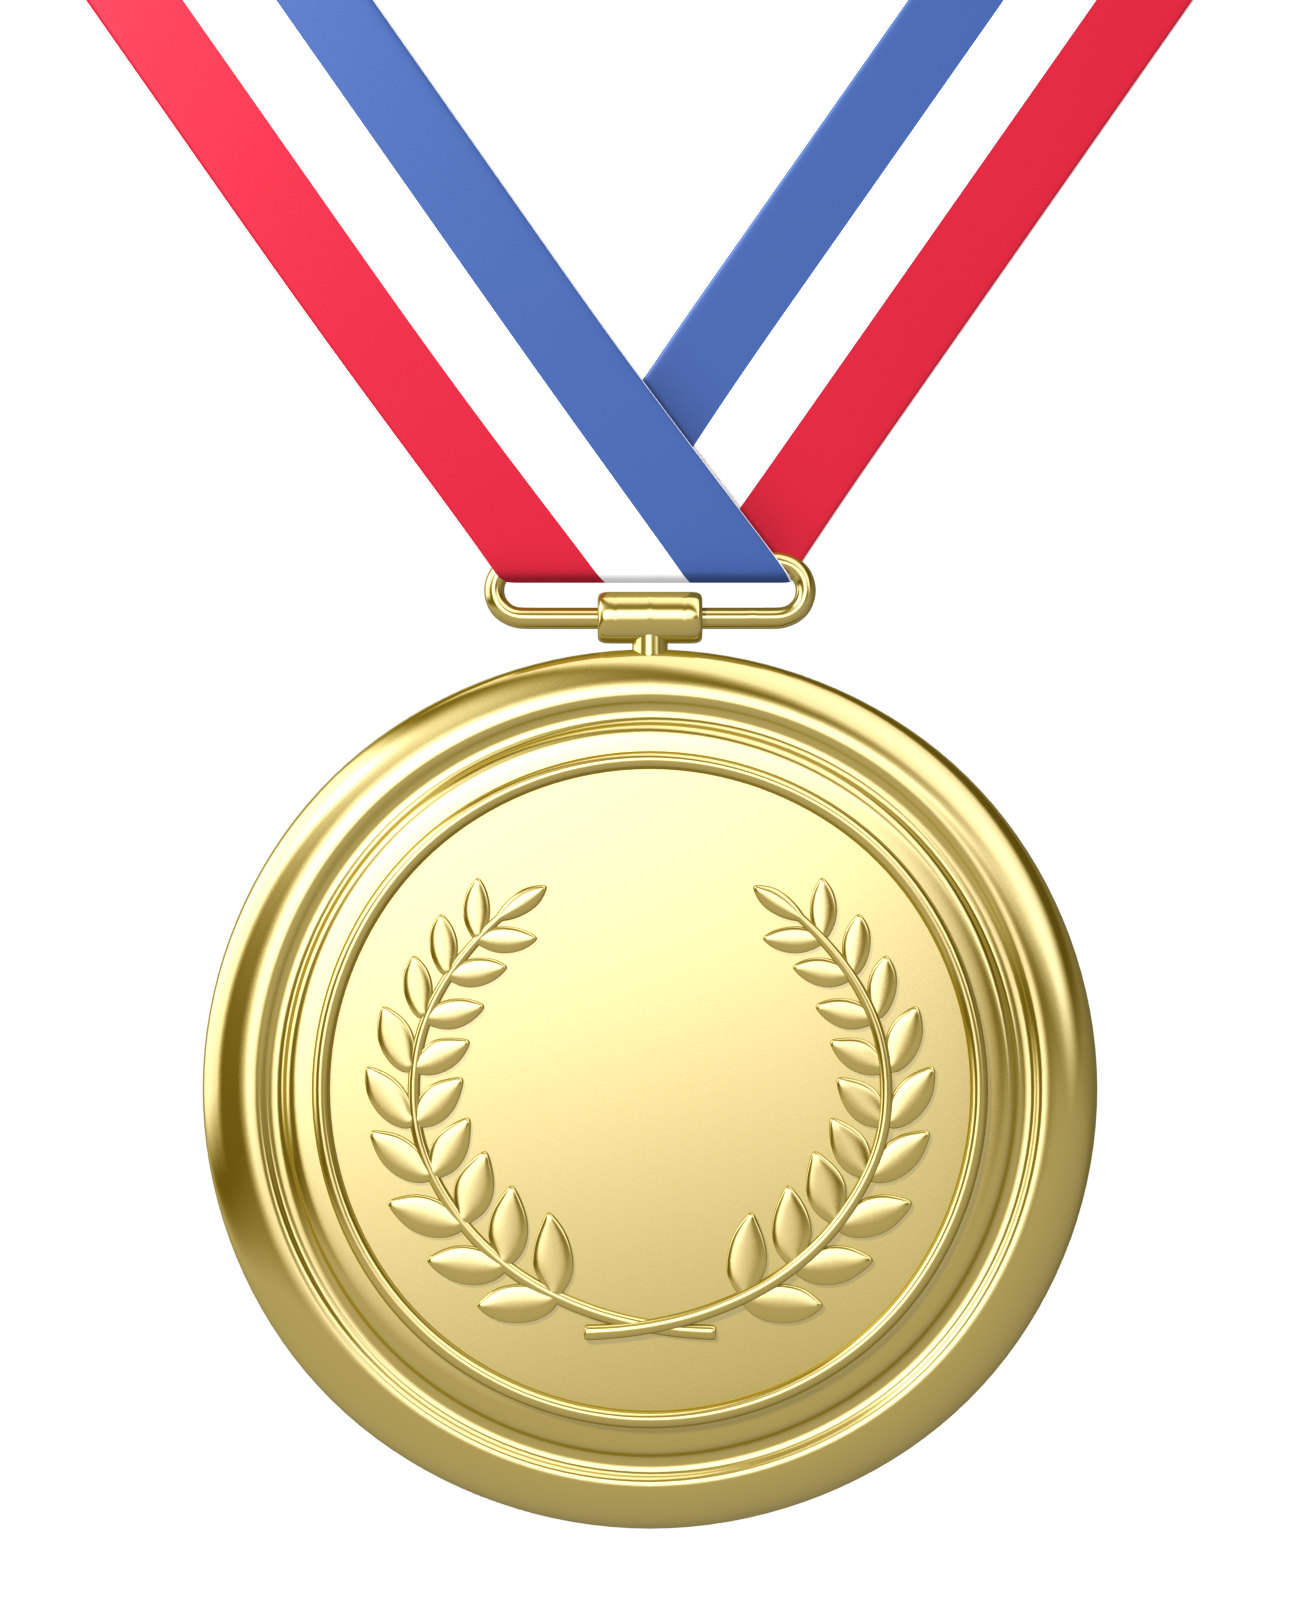 sports · cups and medals